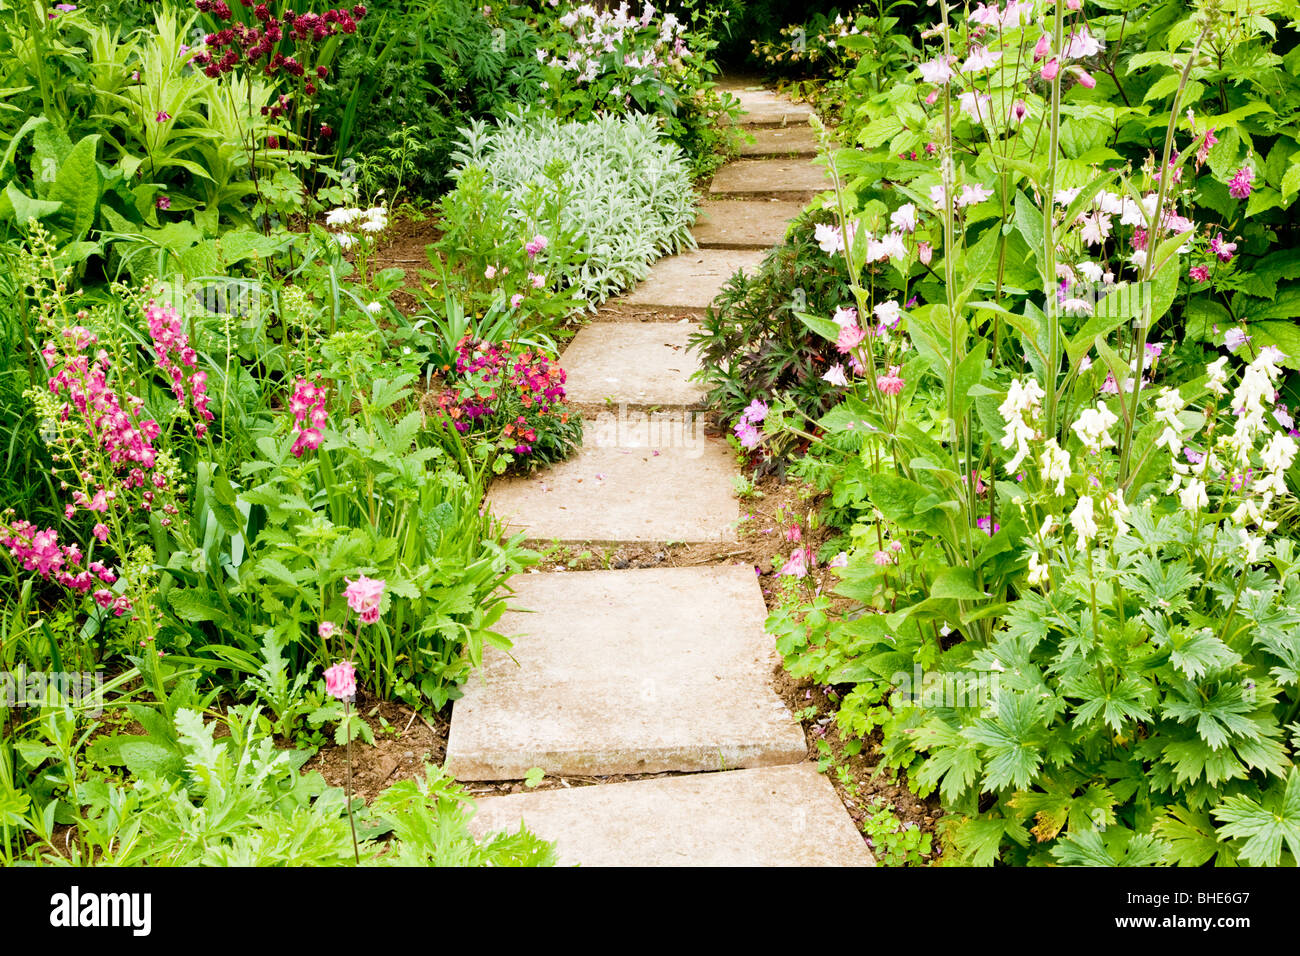 Pathway of paving slabs between summer borders of aquilegia flowers in an English country garden Stock Photo